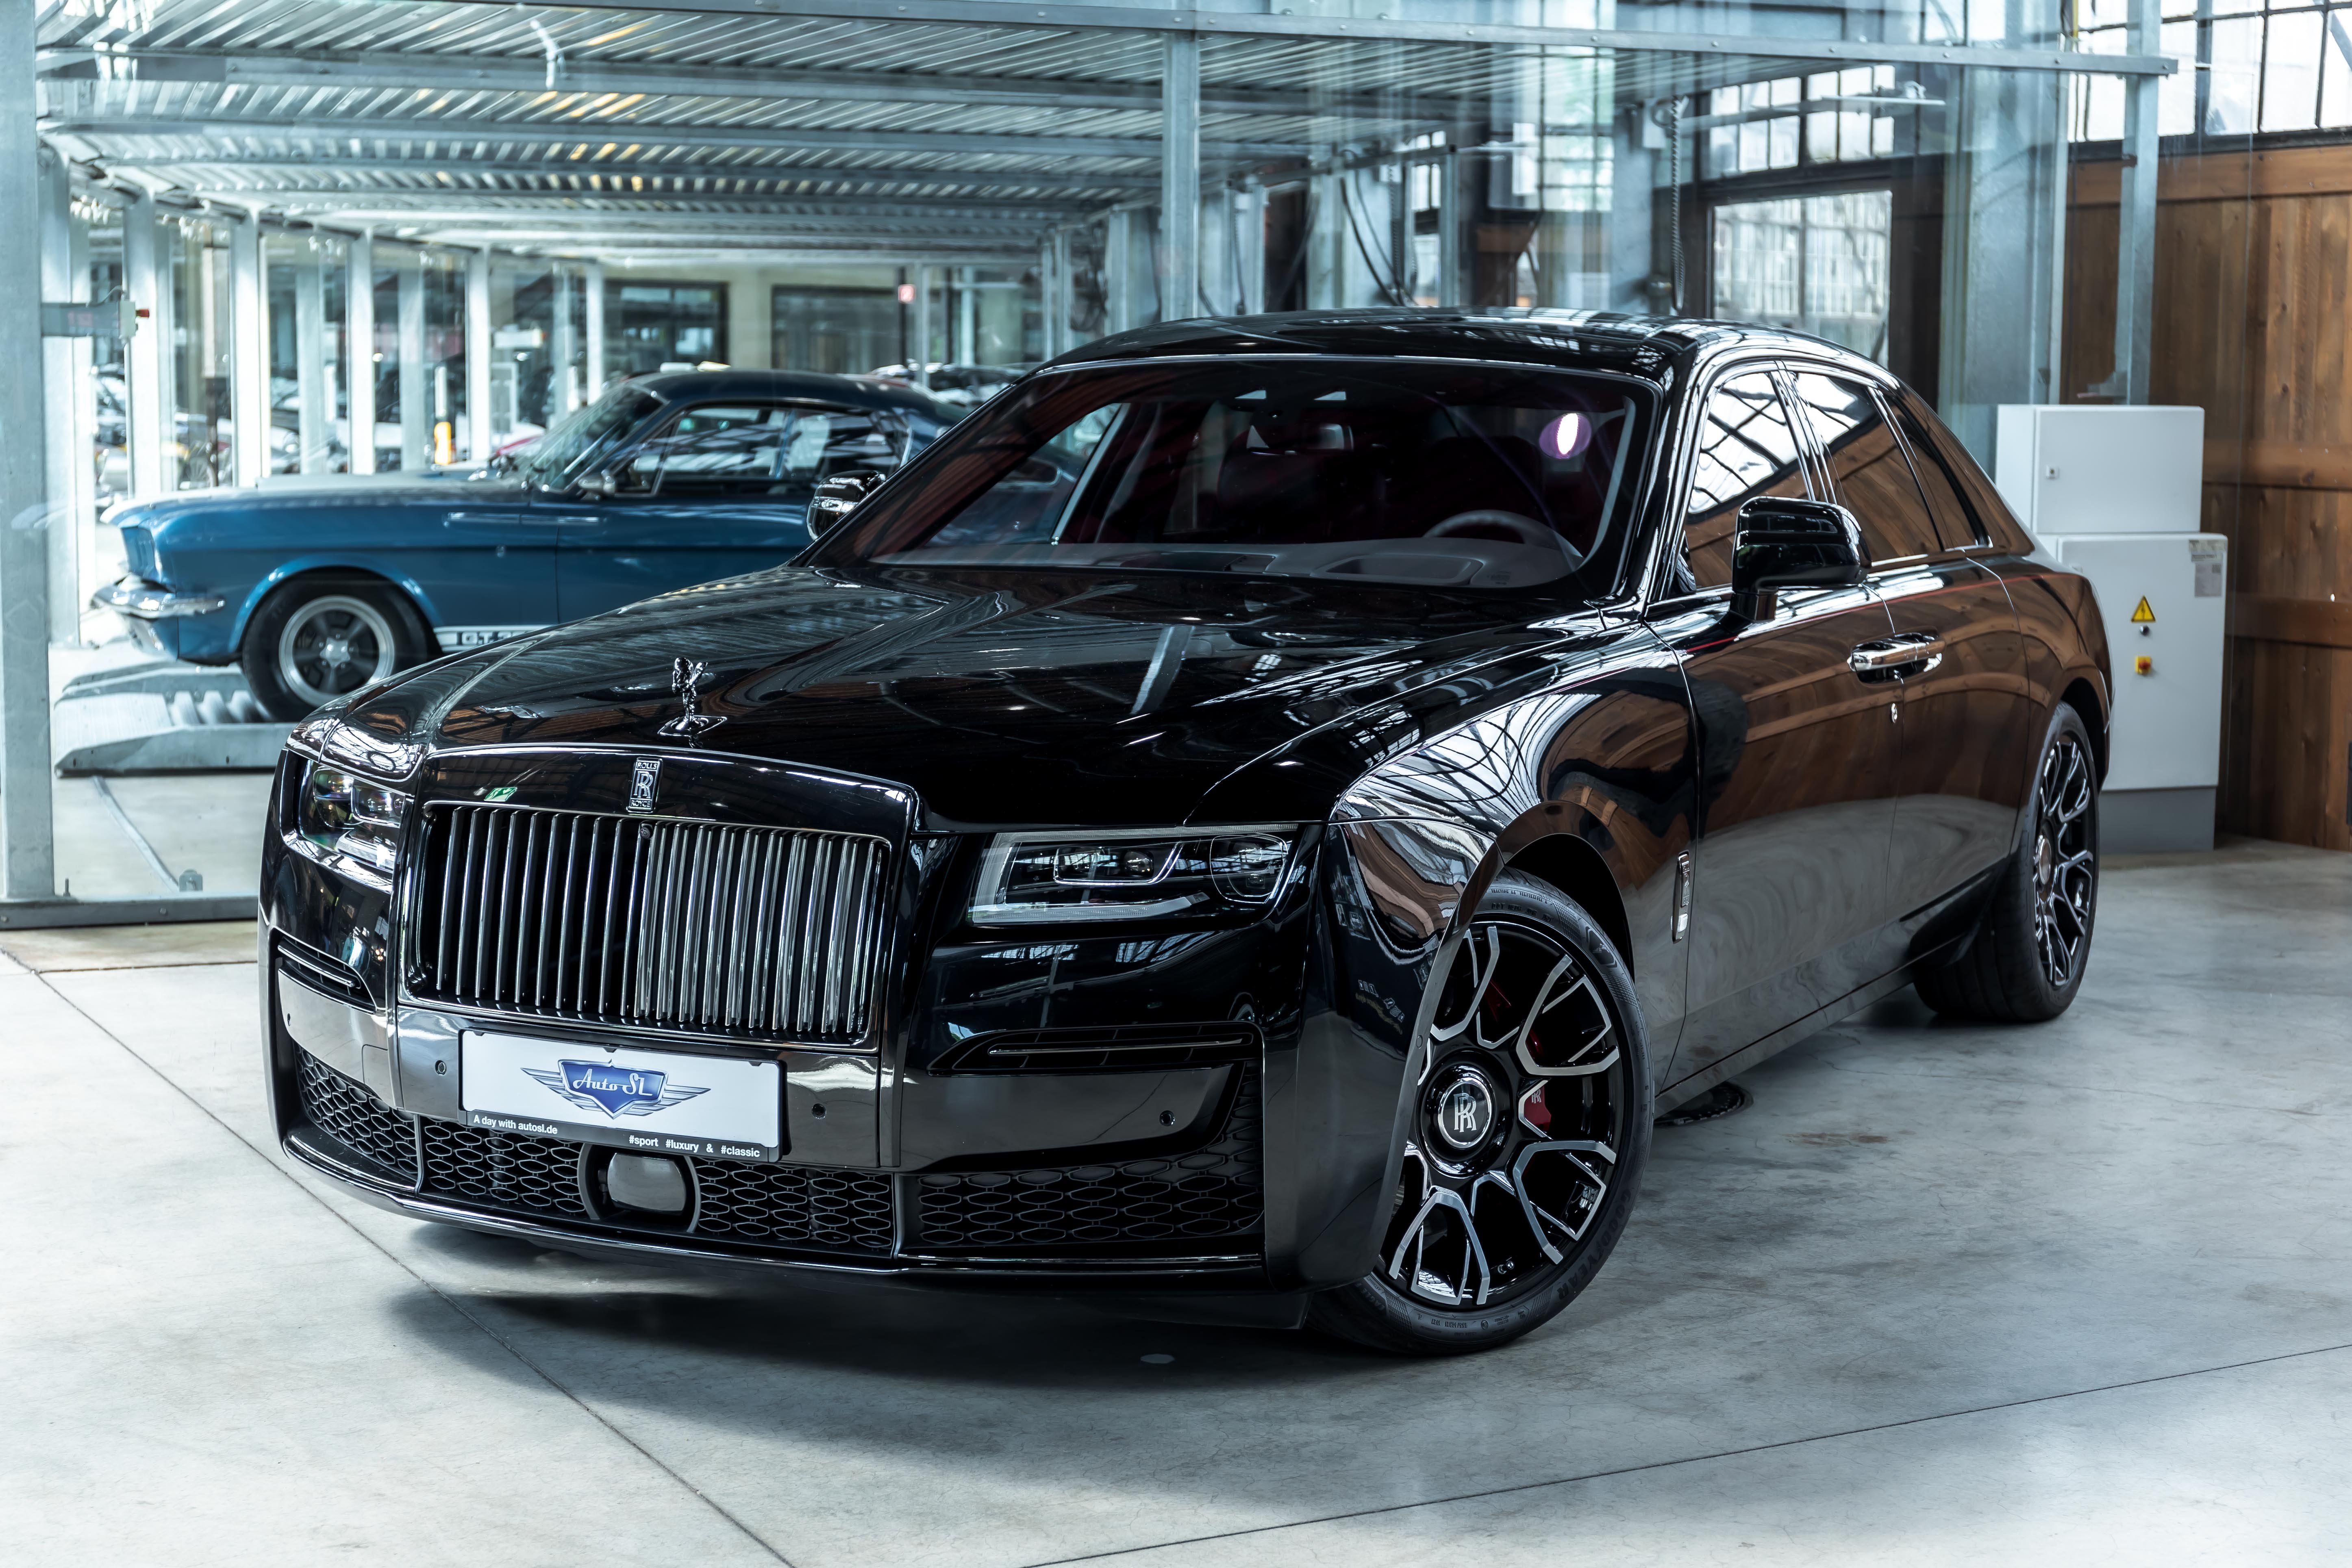 https://www.classicdriver.com/sites/default/files/users/116317/cars_images/116317-933137-car-20220919_121110-autosl_-_rolls_royce_ghost_black_badge_-_mobile_-9.jpg